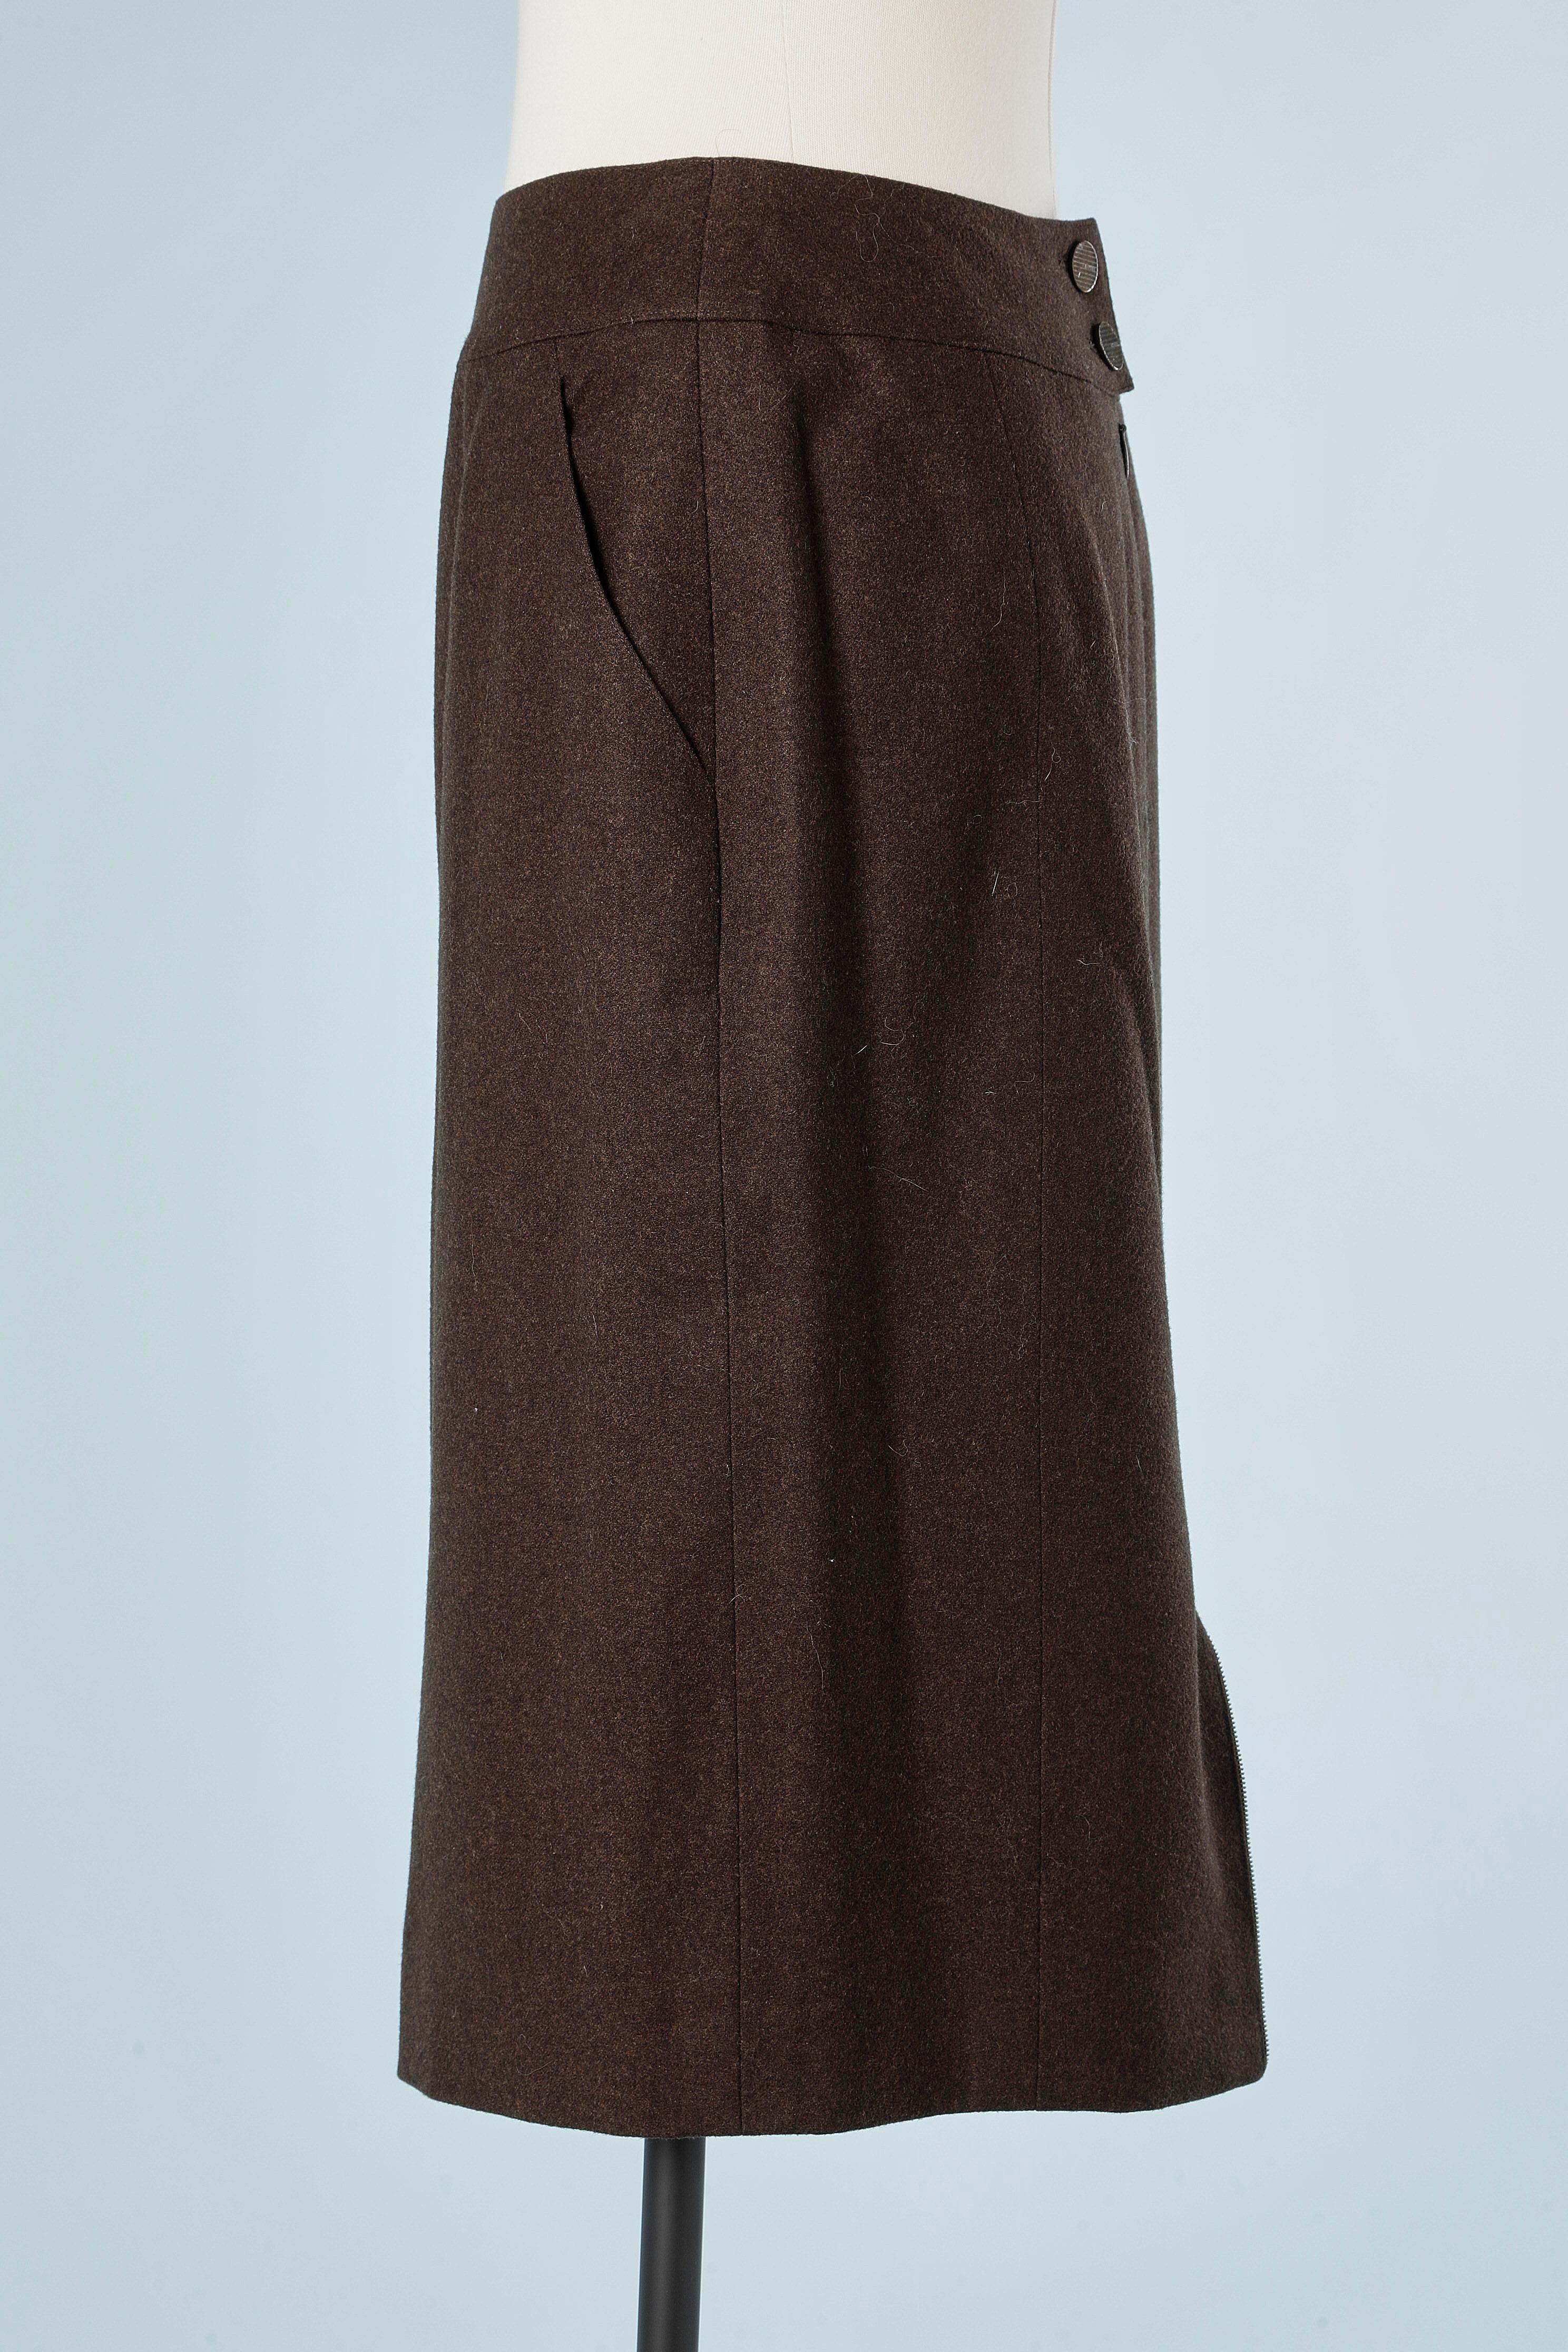 Black Brown cashmere skirt with pocket on the side Chanel  For Sale